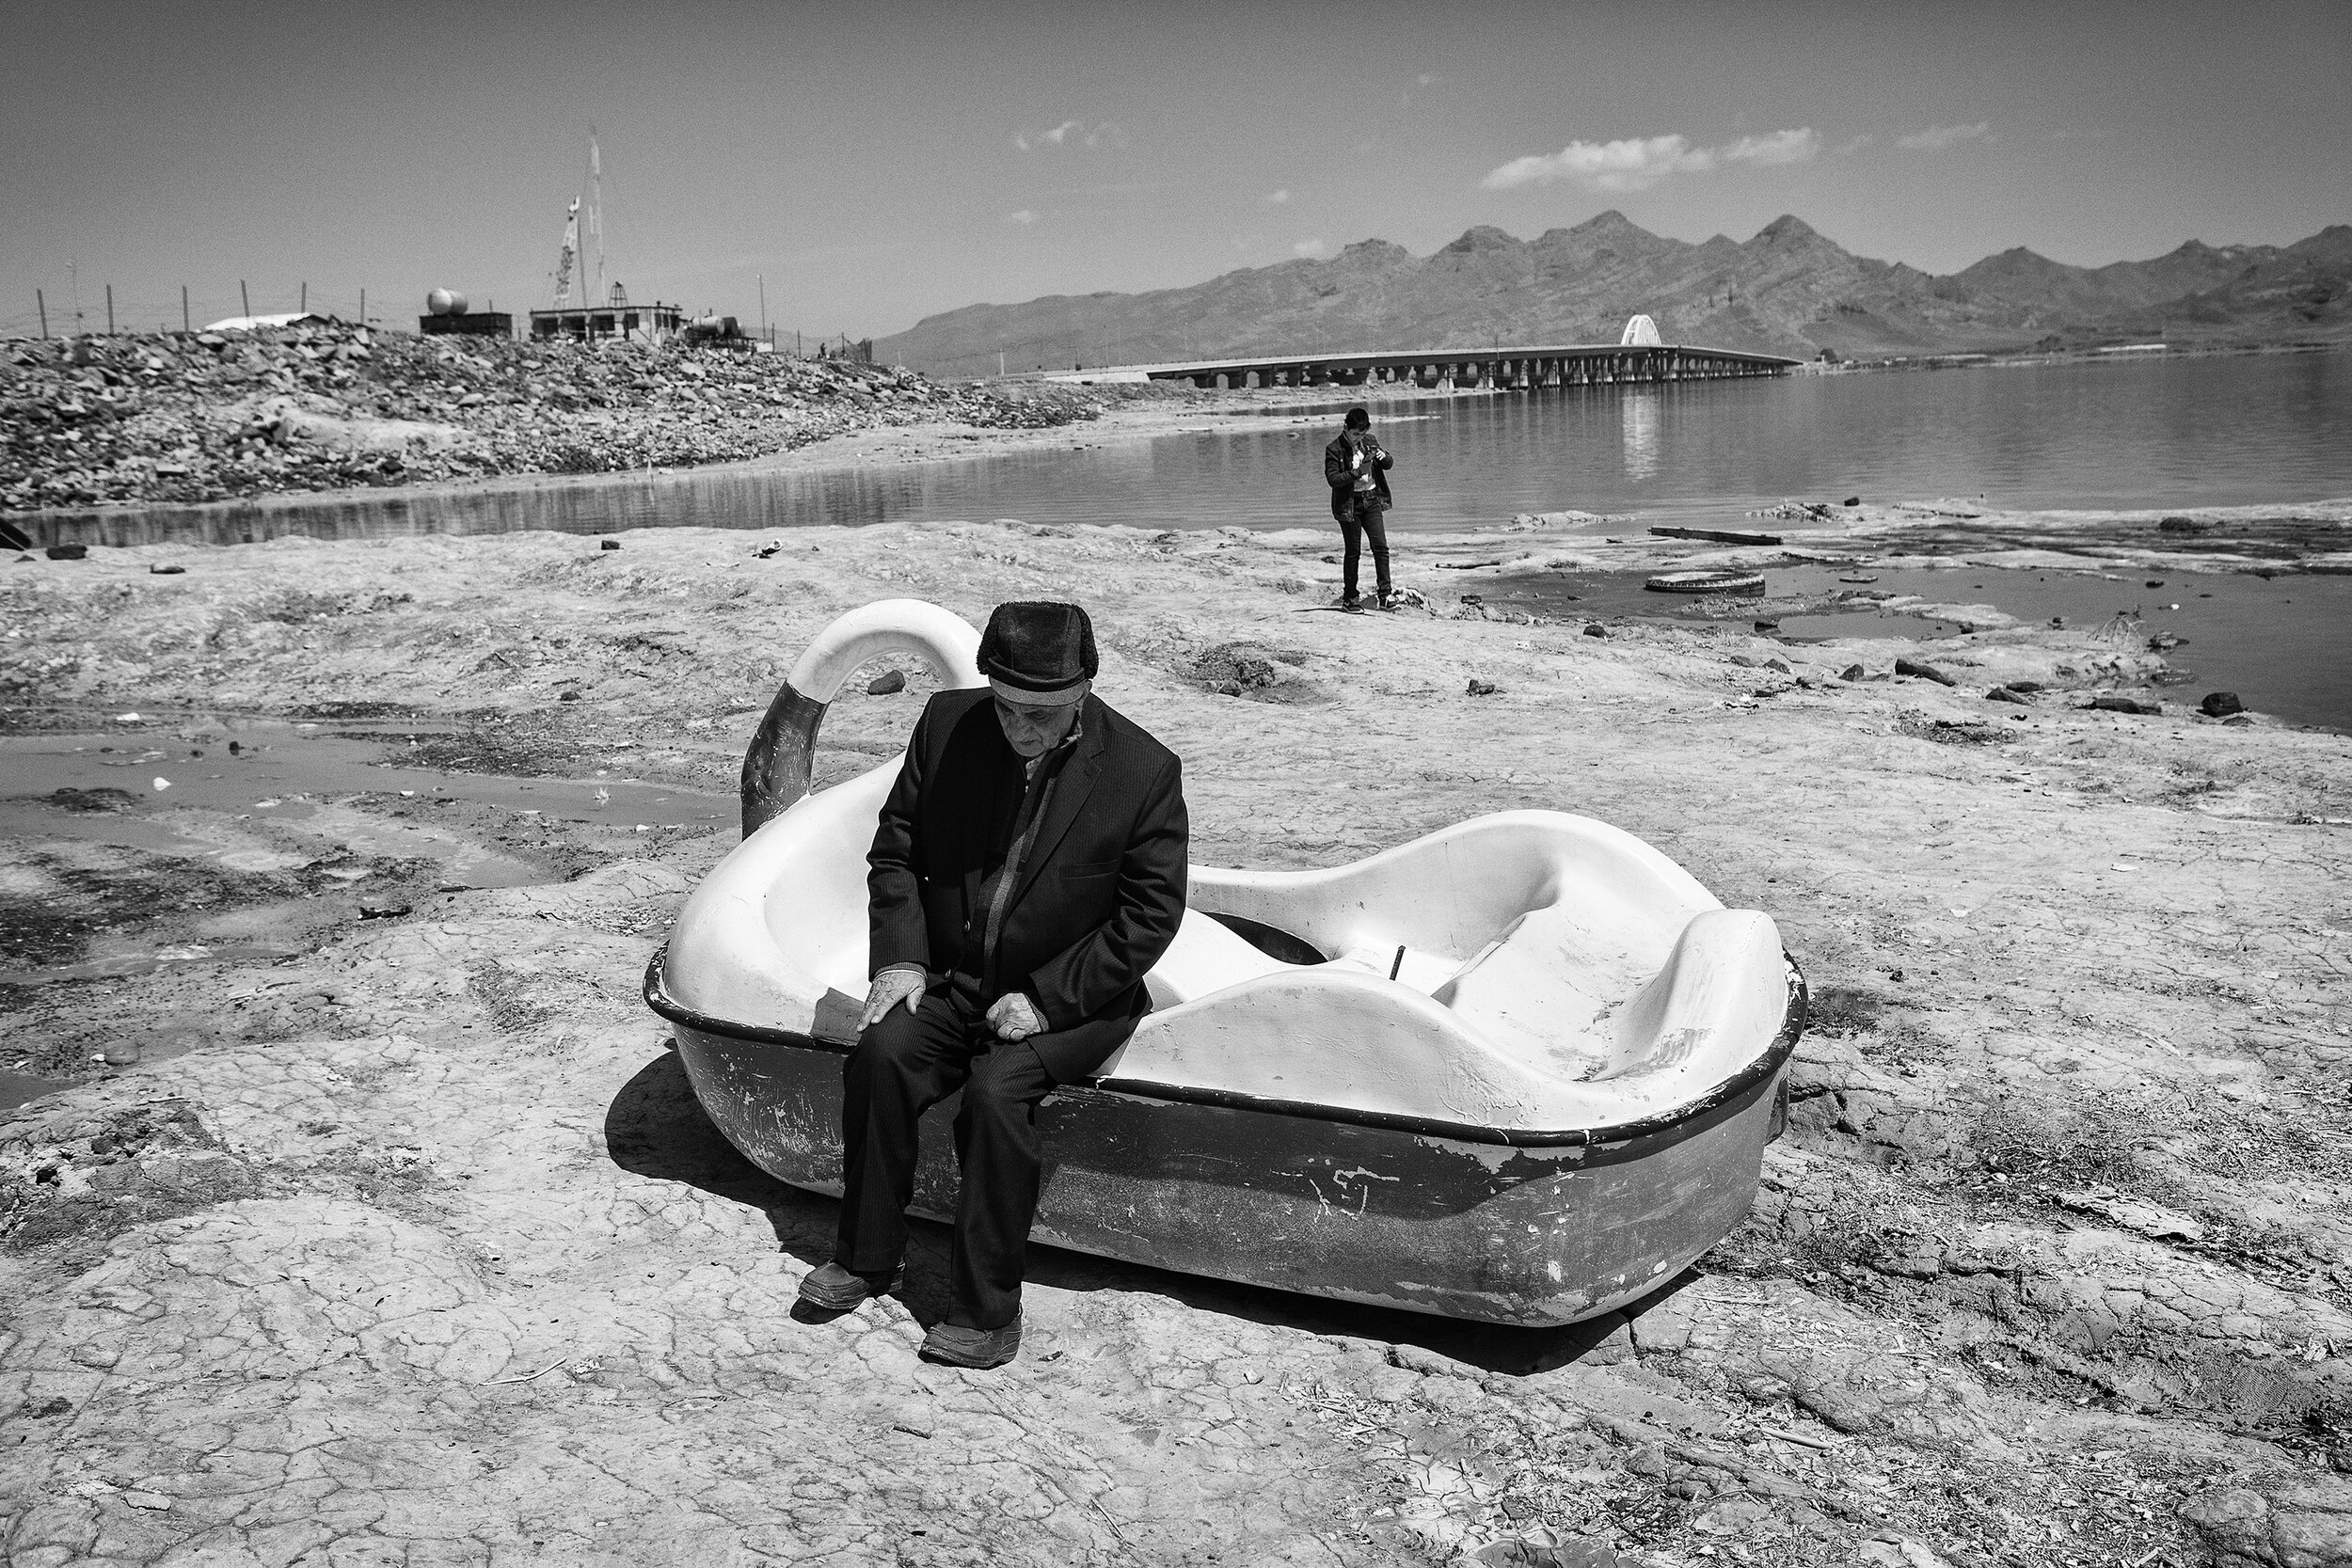  Azerbaijan, Islami Island. My father is 83 years old. He has come to the dried-up Lake Urmia for the New Year holidays. He used to swim in this lake every summer, and believed the water of the Lake was useful for his skin. Since he has been afflicte